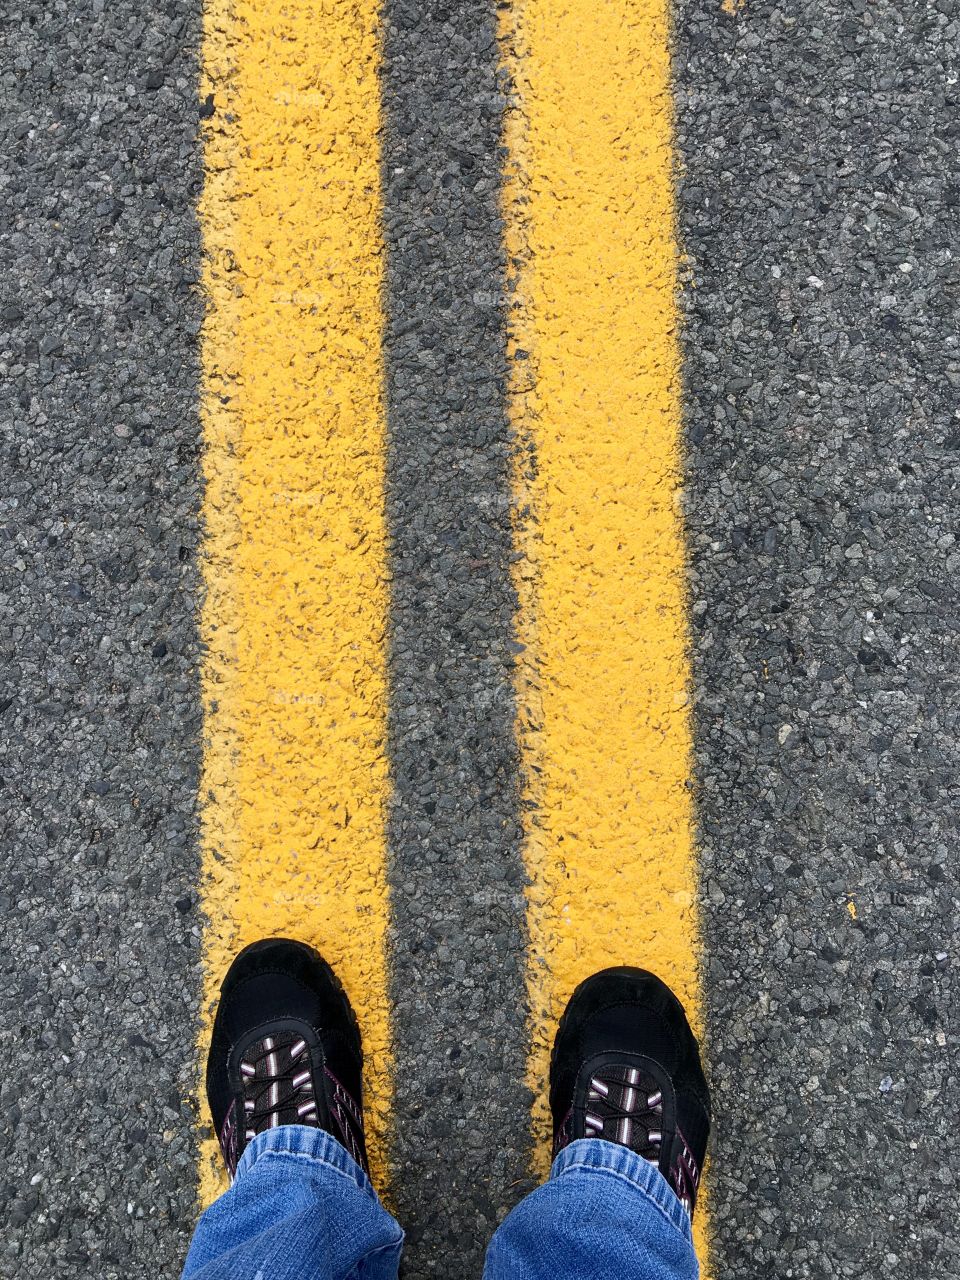 Feet in Middle of Road, Double Yellow Lines